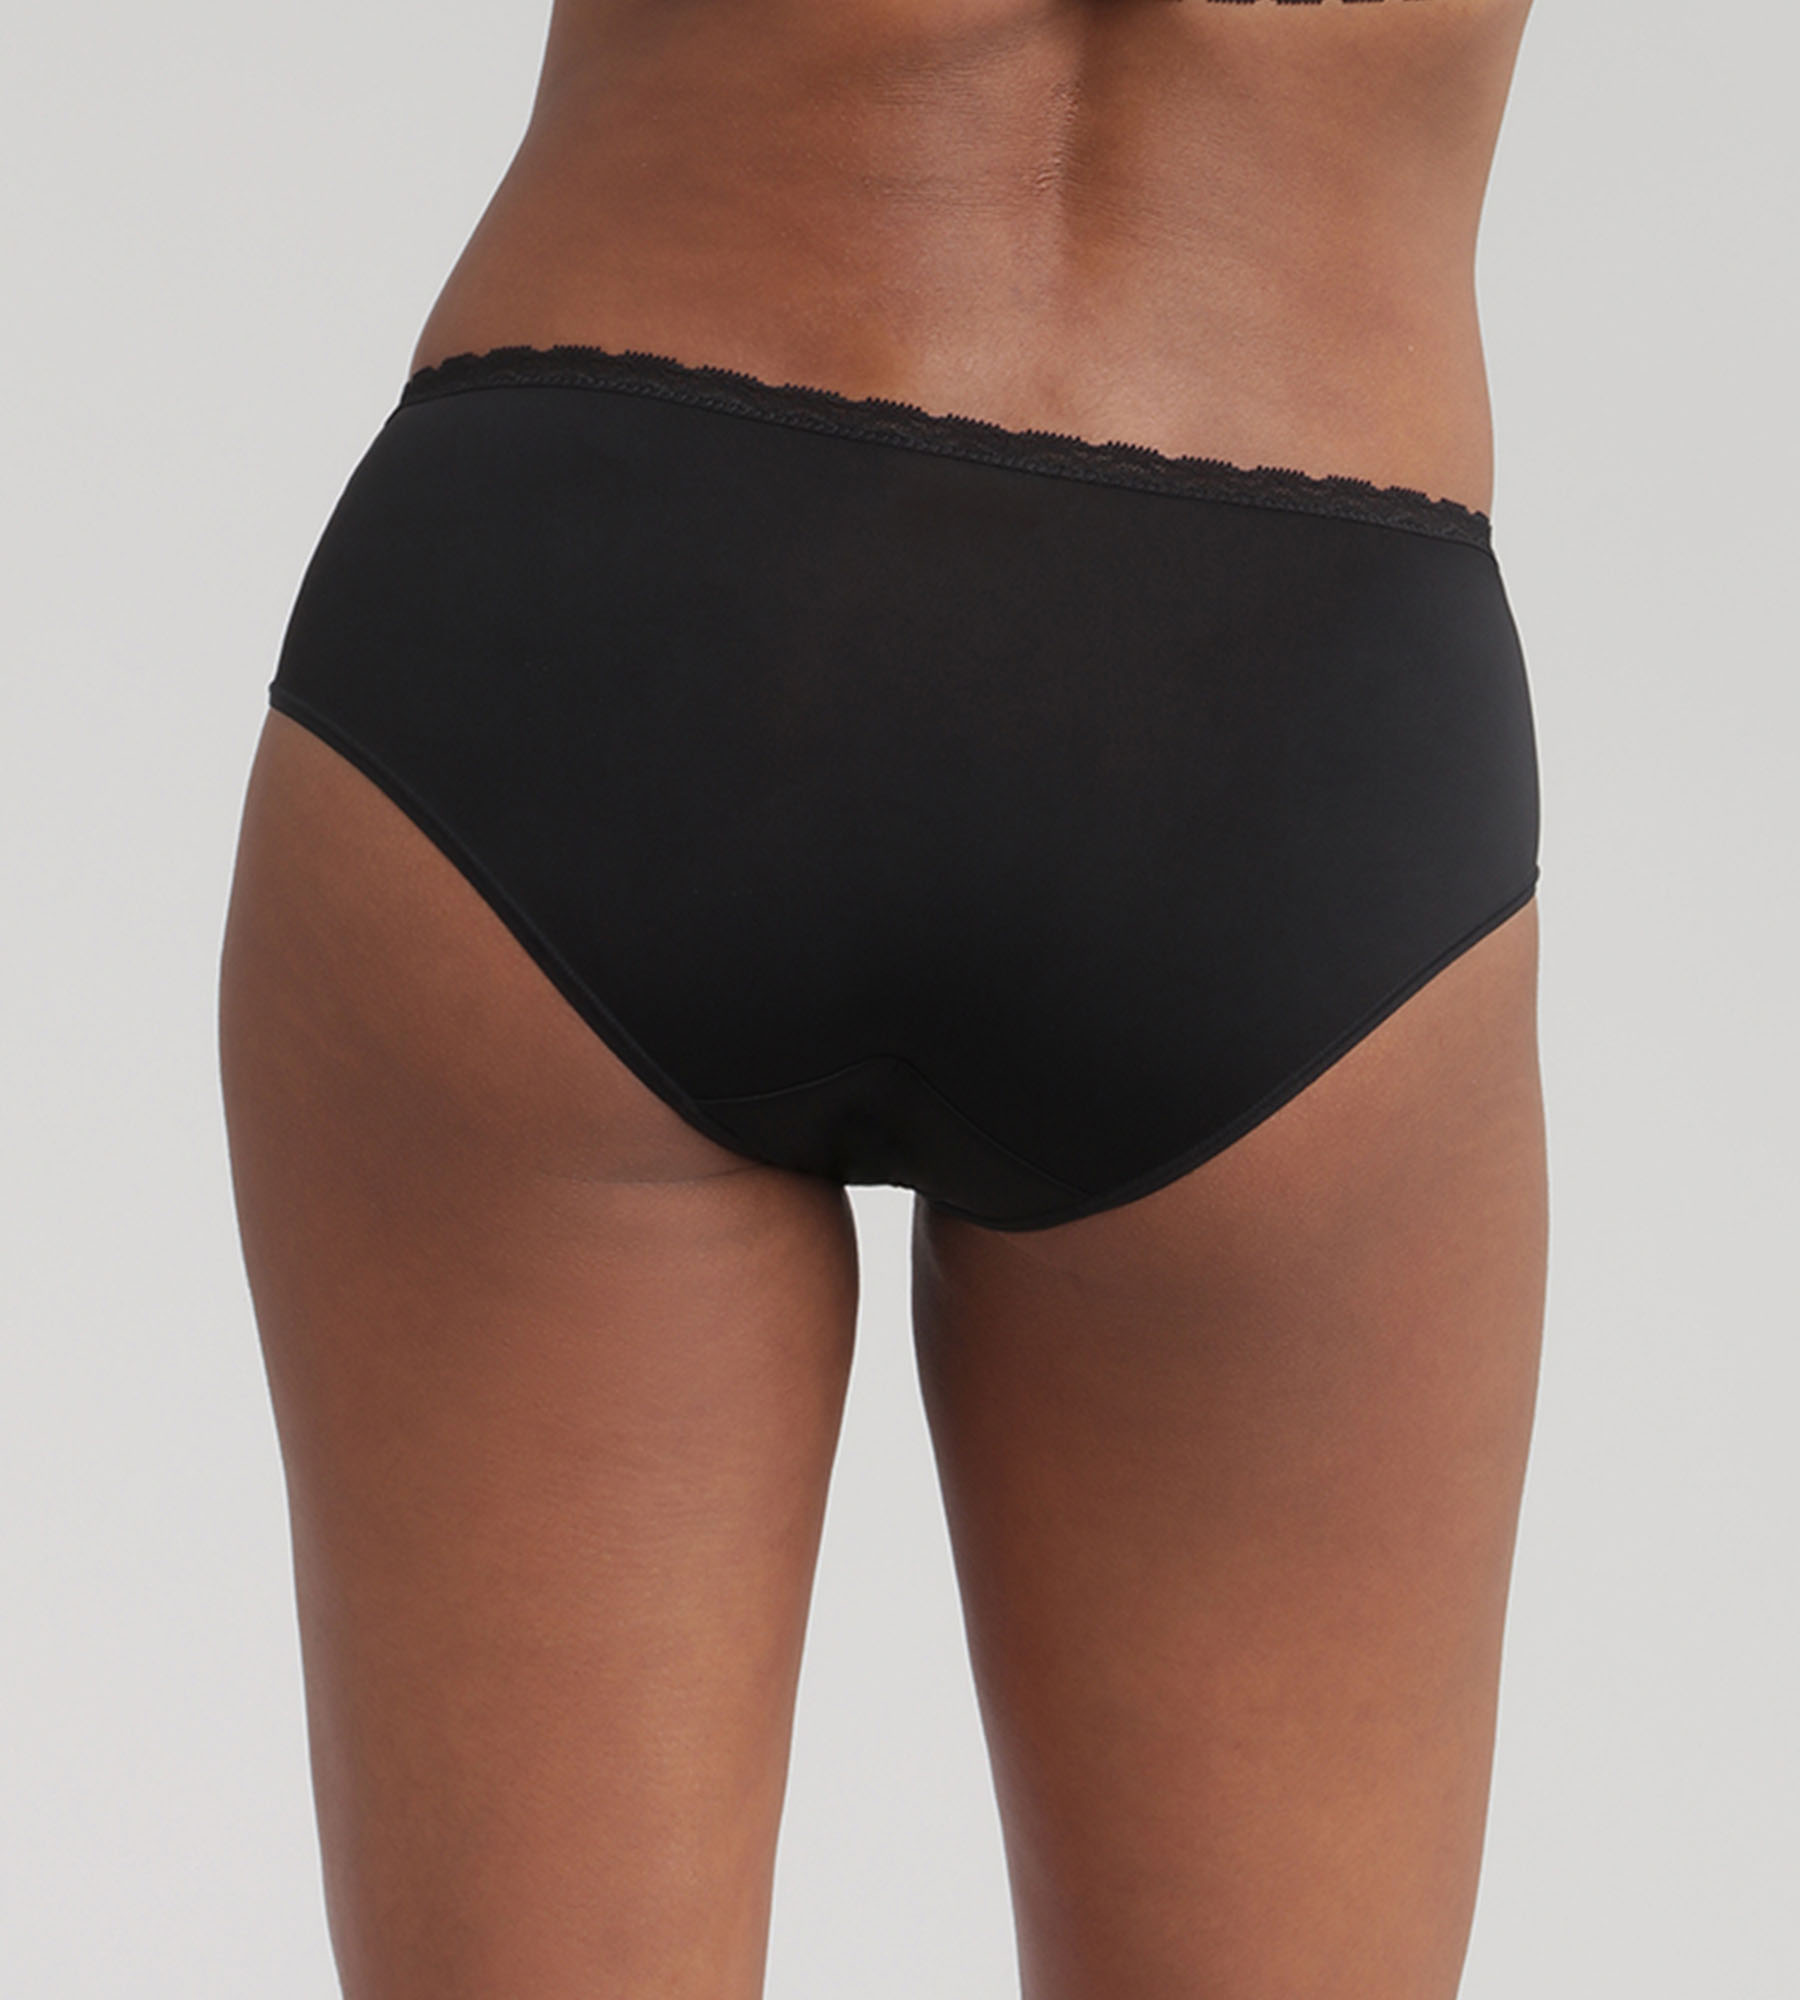 Lace midi knickers in black - Ideal Posture, , PLAYTEX